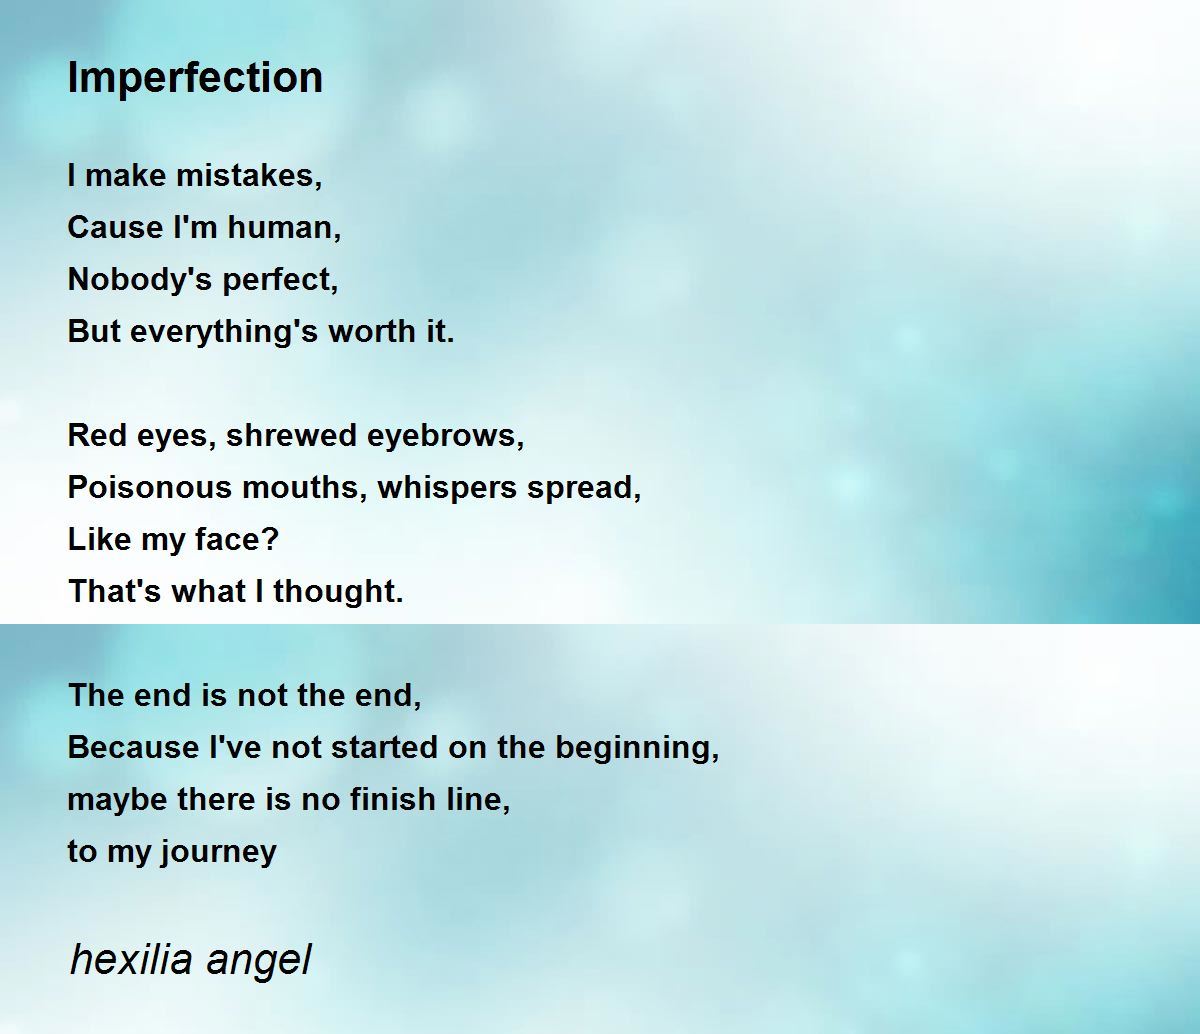 Imperfection - Imperfection Poem by hexilia angel